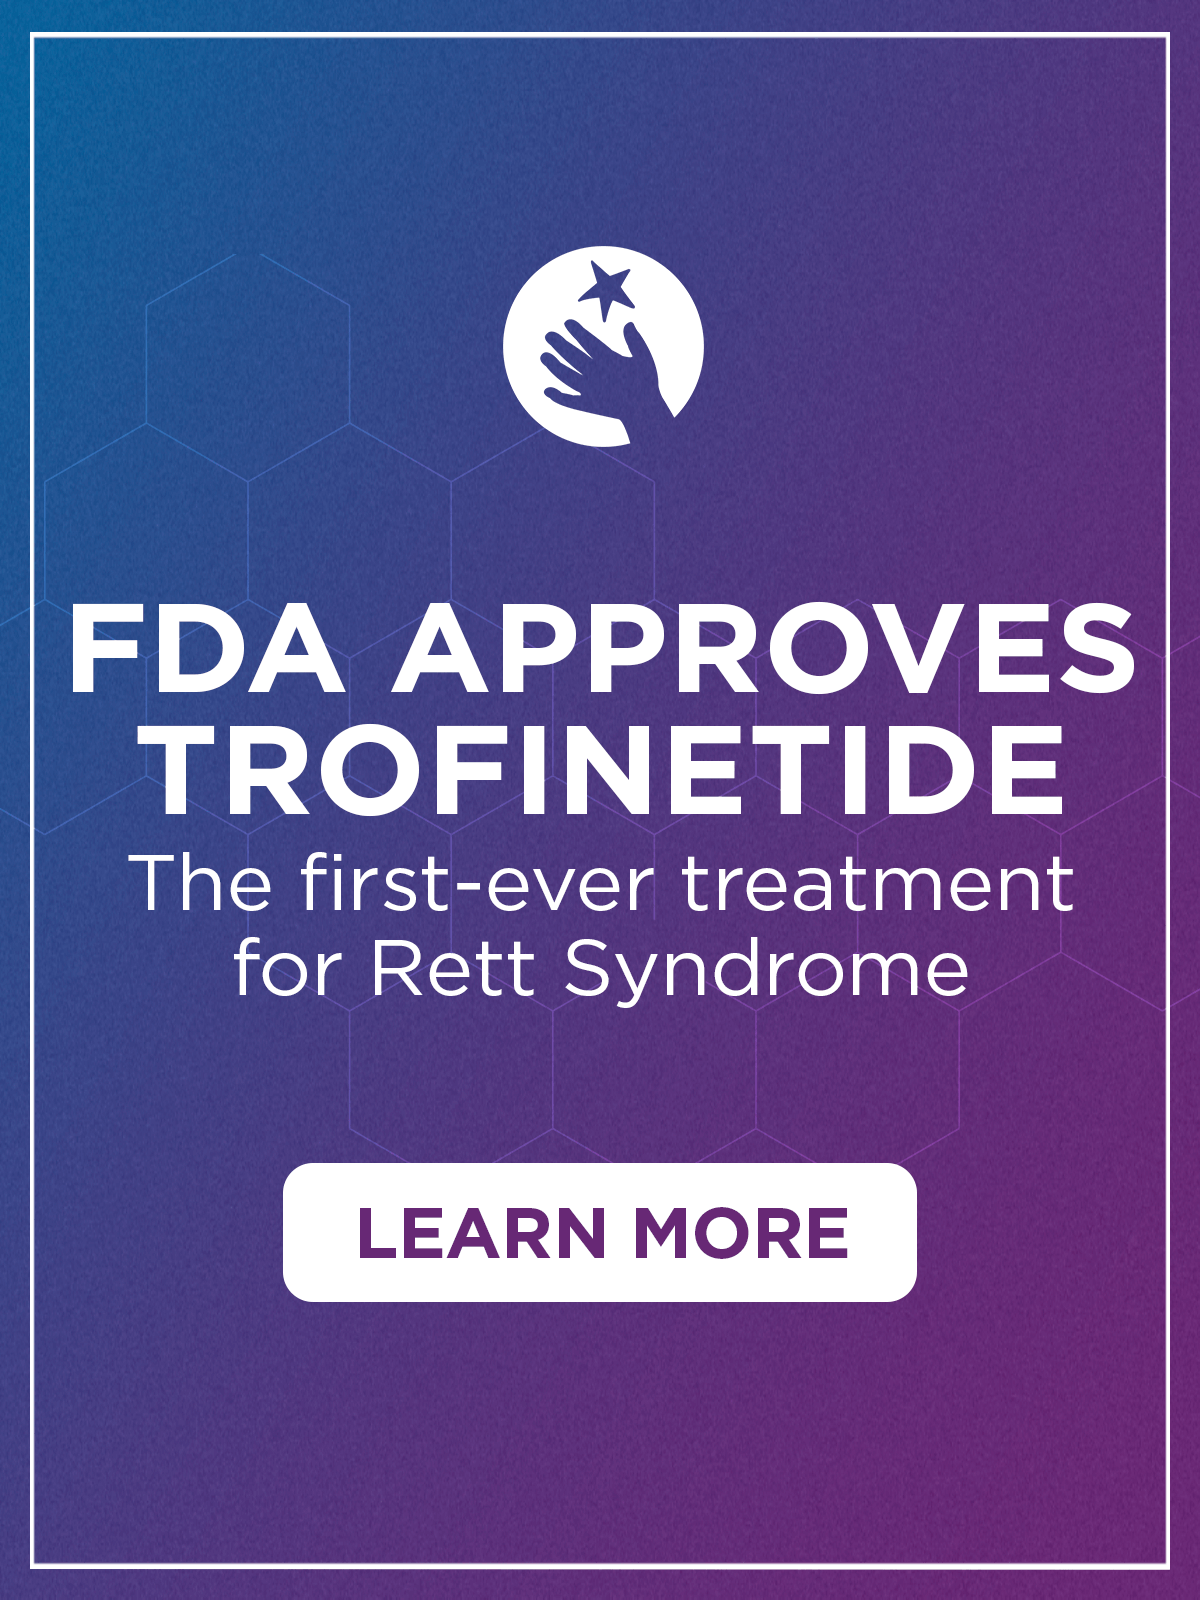 A FIRST FOR RETT: FDA approves Trofinetide for the treatment of Rett syndrome!